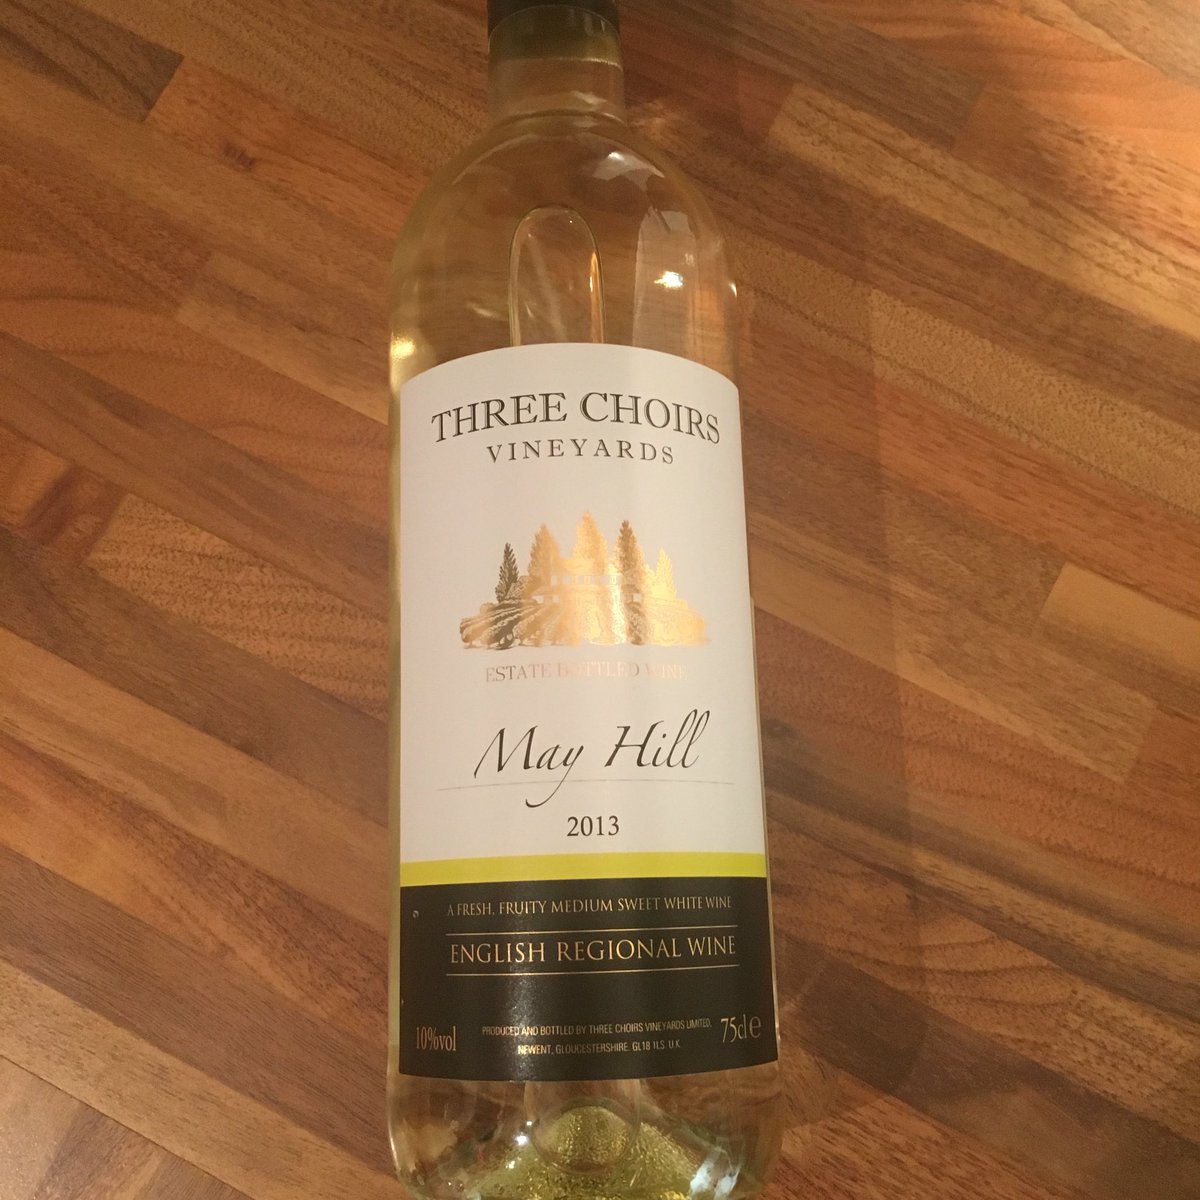 Picked up my fav #wine today very lucky it's local 😊 #mediumsweet from @3choirsnewent #vineyard #newent #gloucester